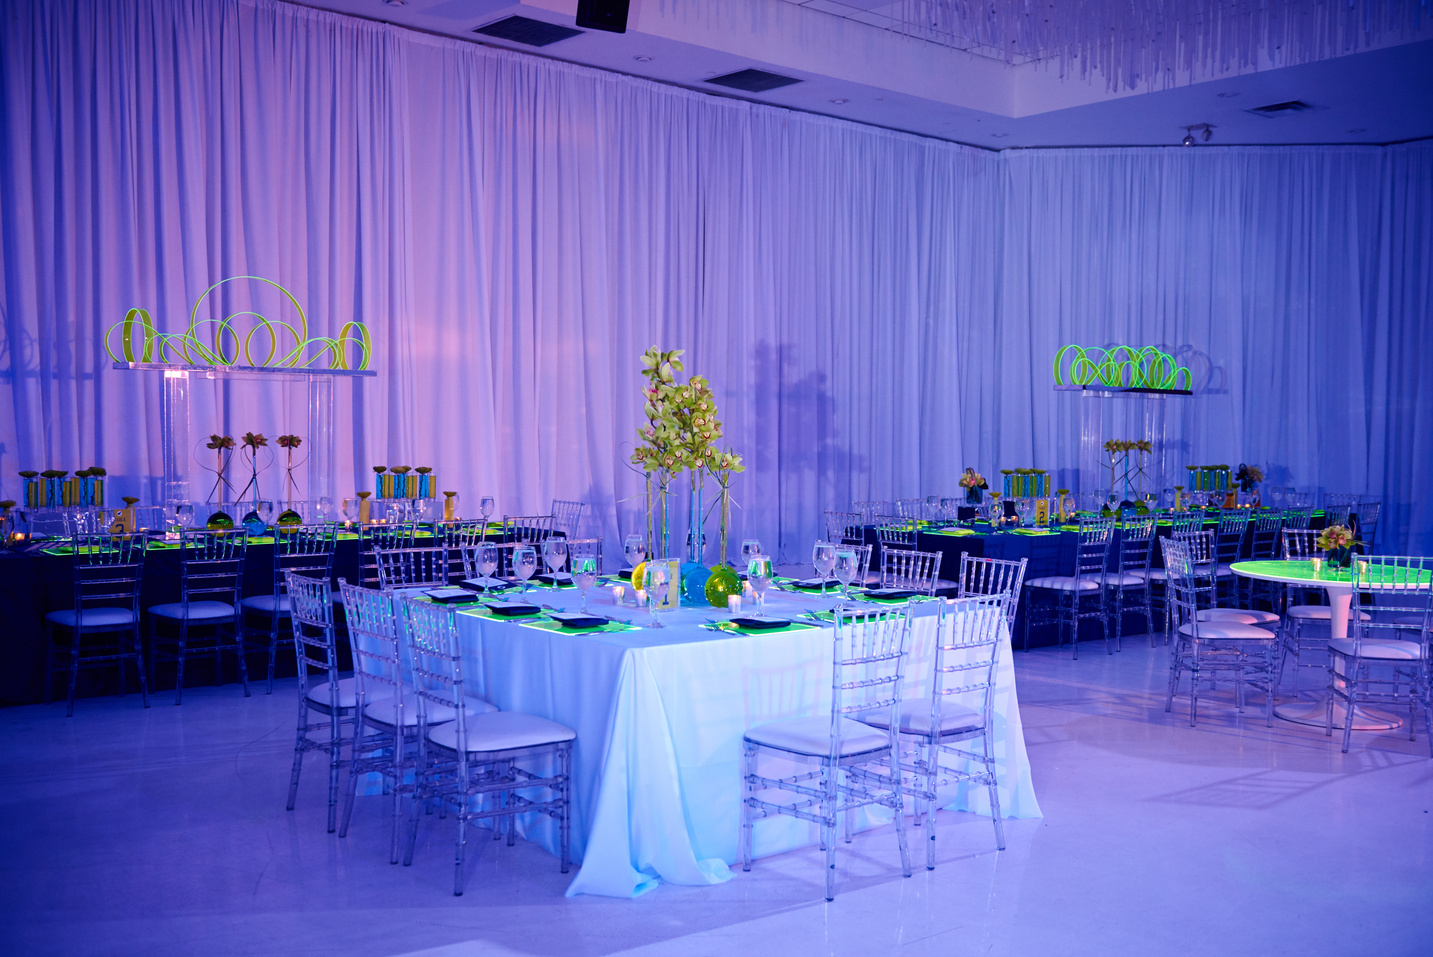 Beautiful guest square table set up for a wedding or social event in the ballroom orchid and lucite chairs draped walls